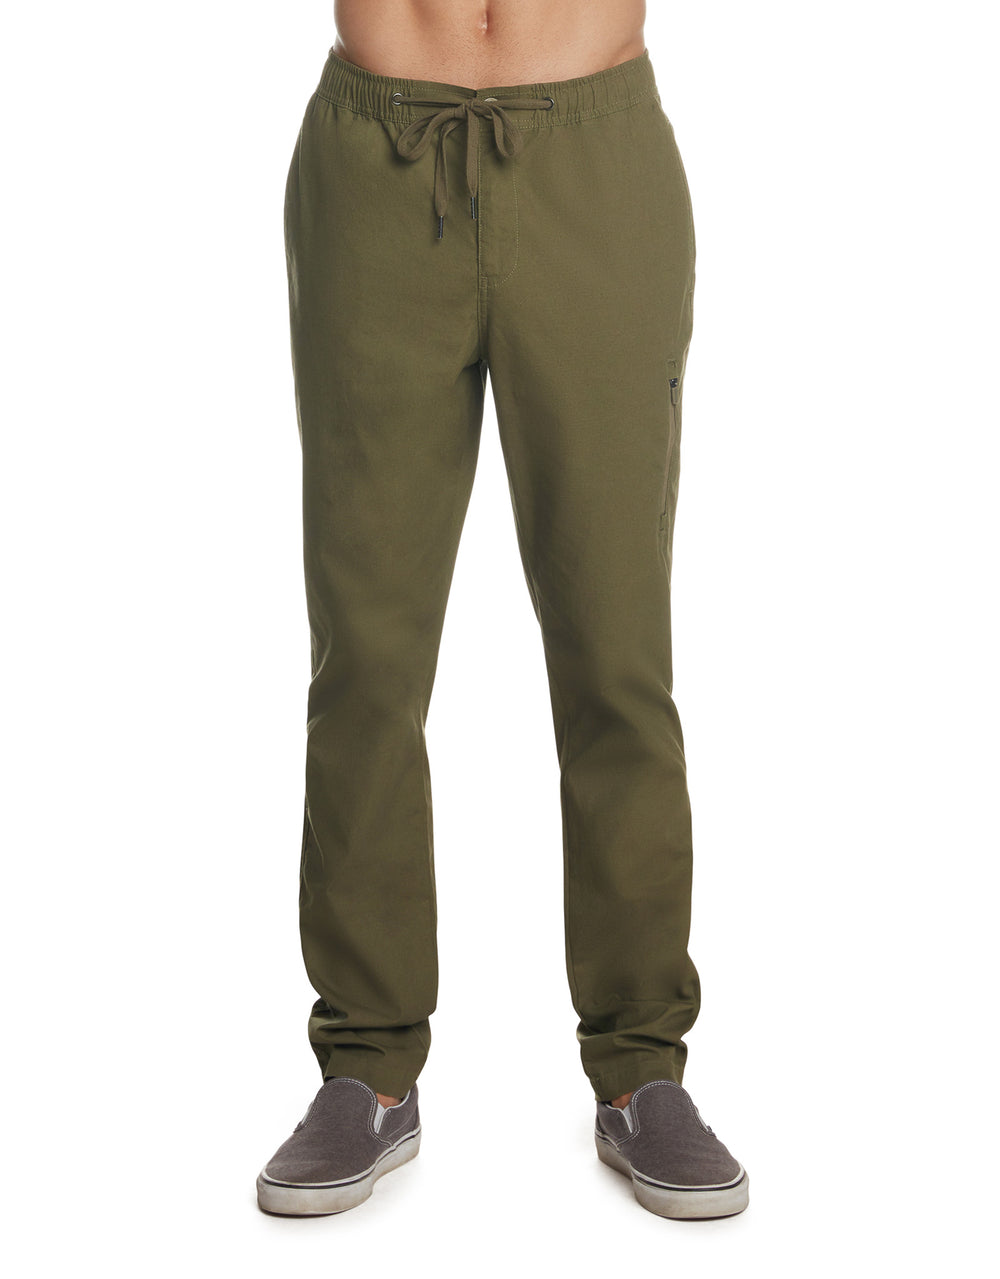 Explorin' Freely Pant - Military Green